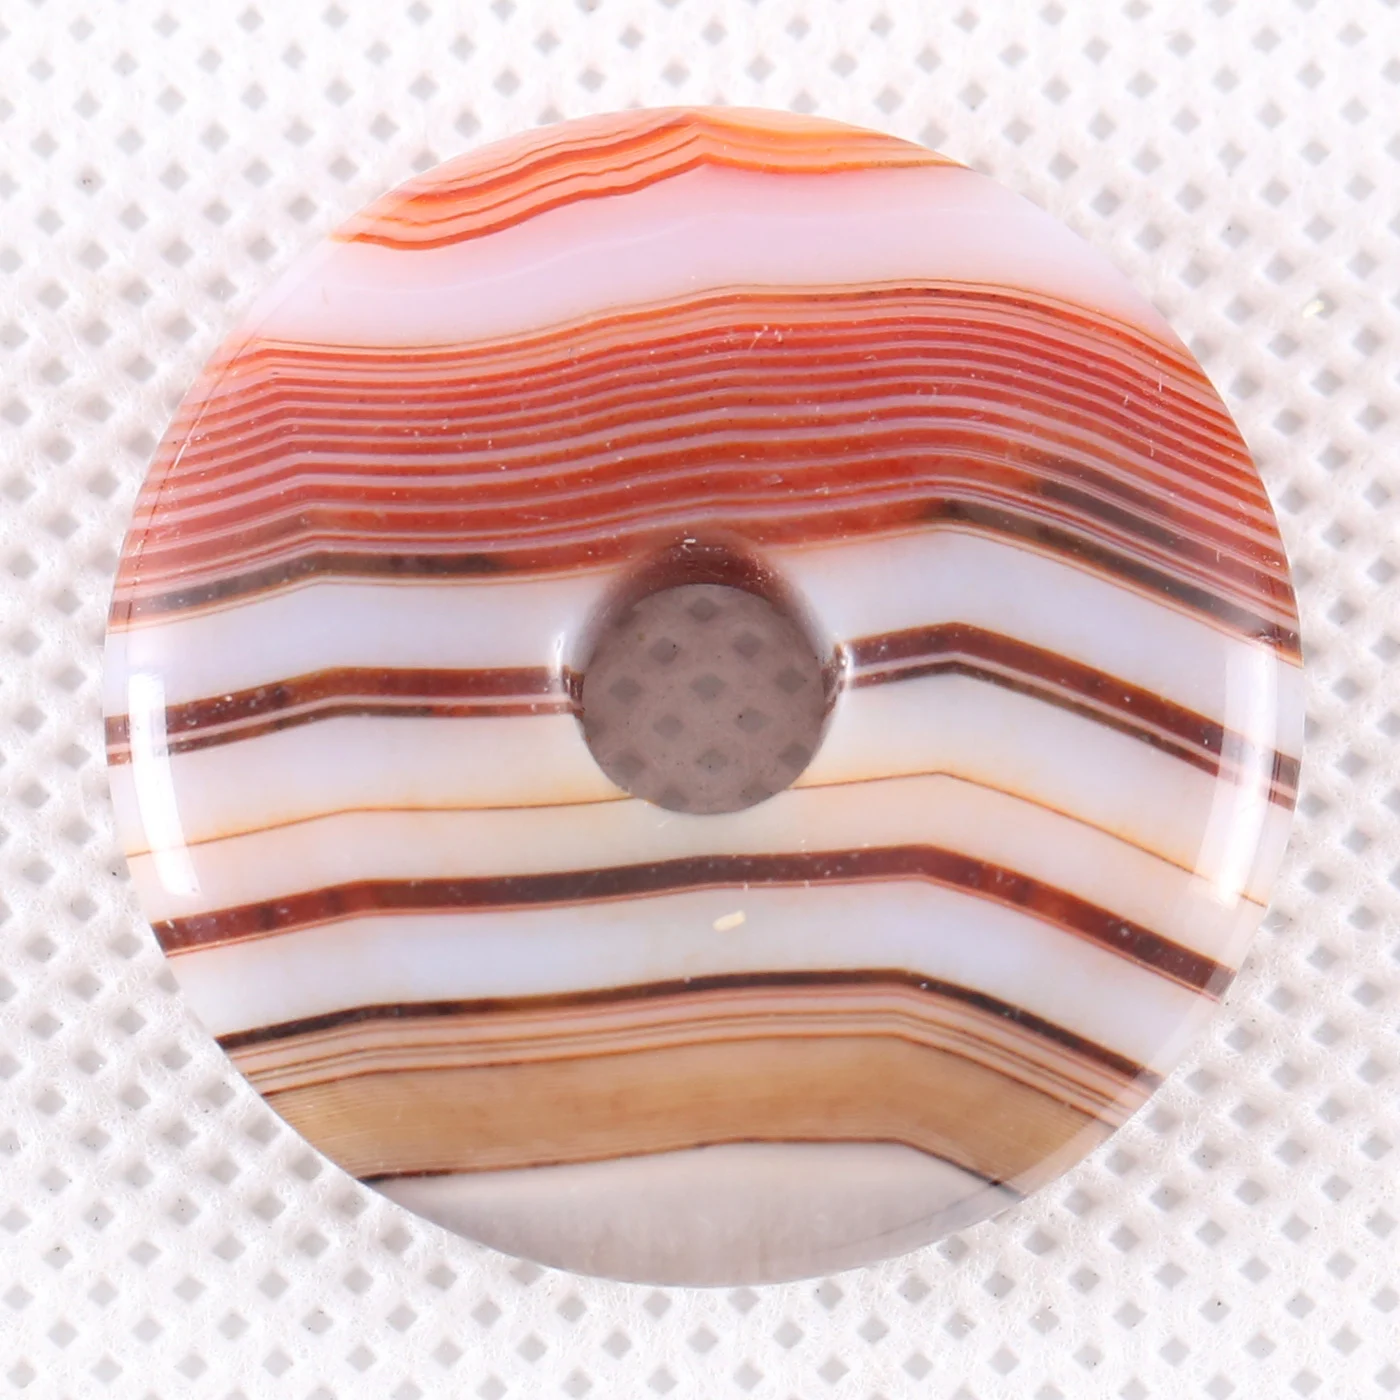 30MM CAB Cabochon Natural Stone Orange Red White Veins Onyx Round Beads For Jewelry Making DIY Necklace Gem Bead 1Pcs  K729